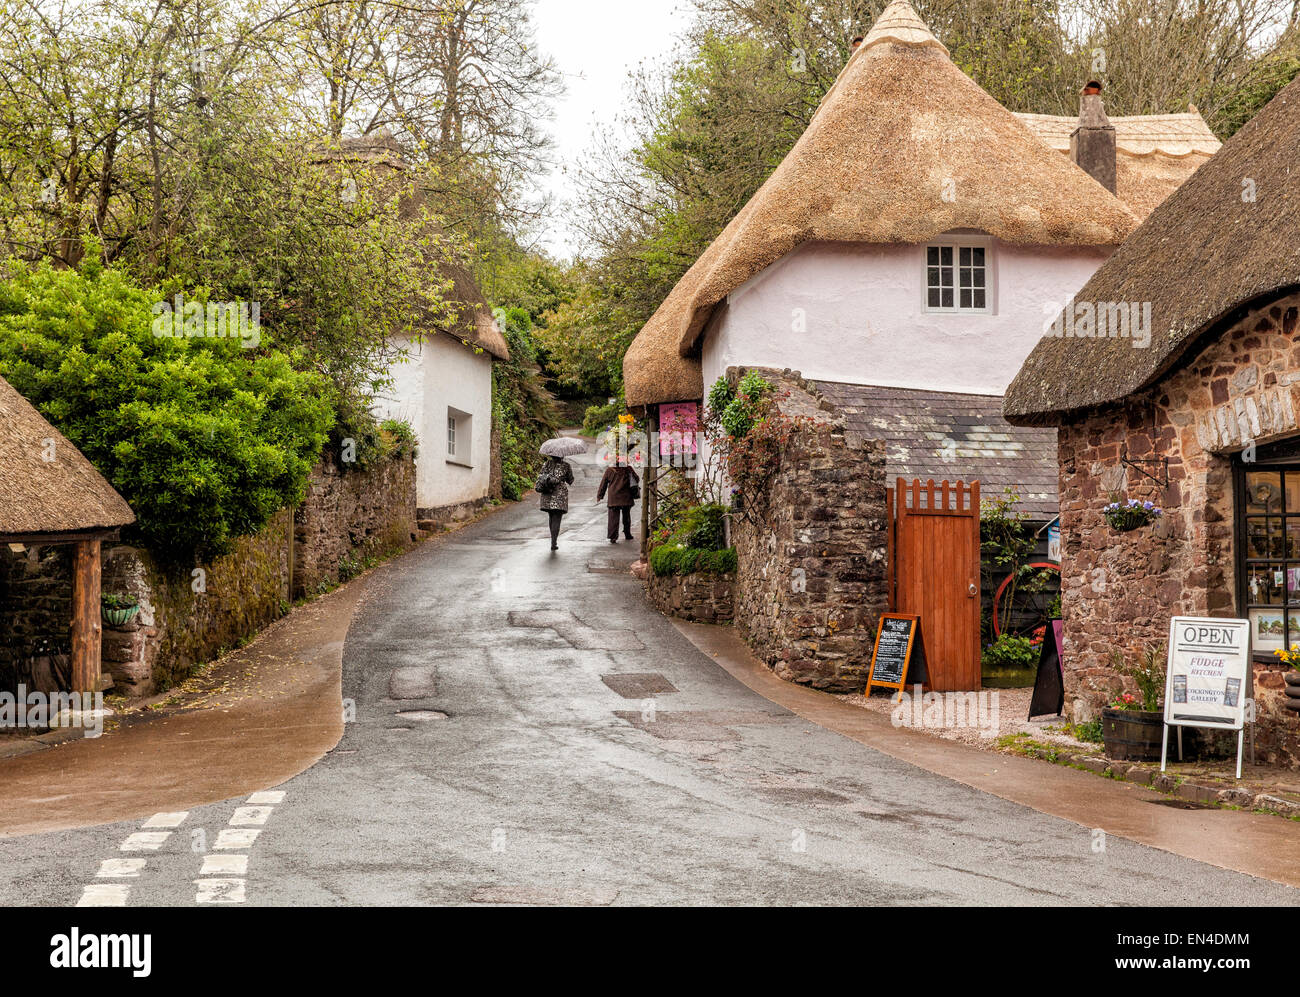 Two middle aged ladies walking up a country lane next to thatched cottages in Devon in England holding umbrellas in the rain Stock Photo